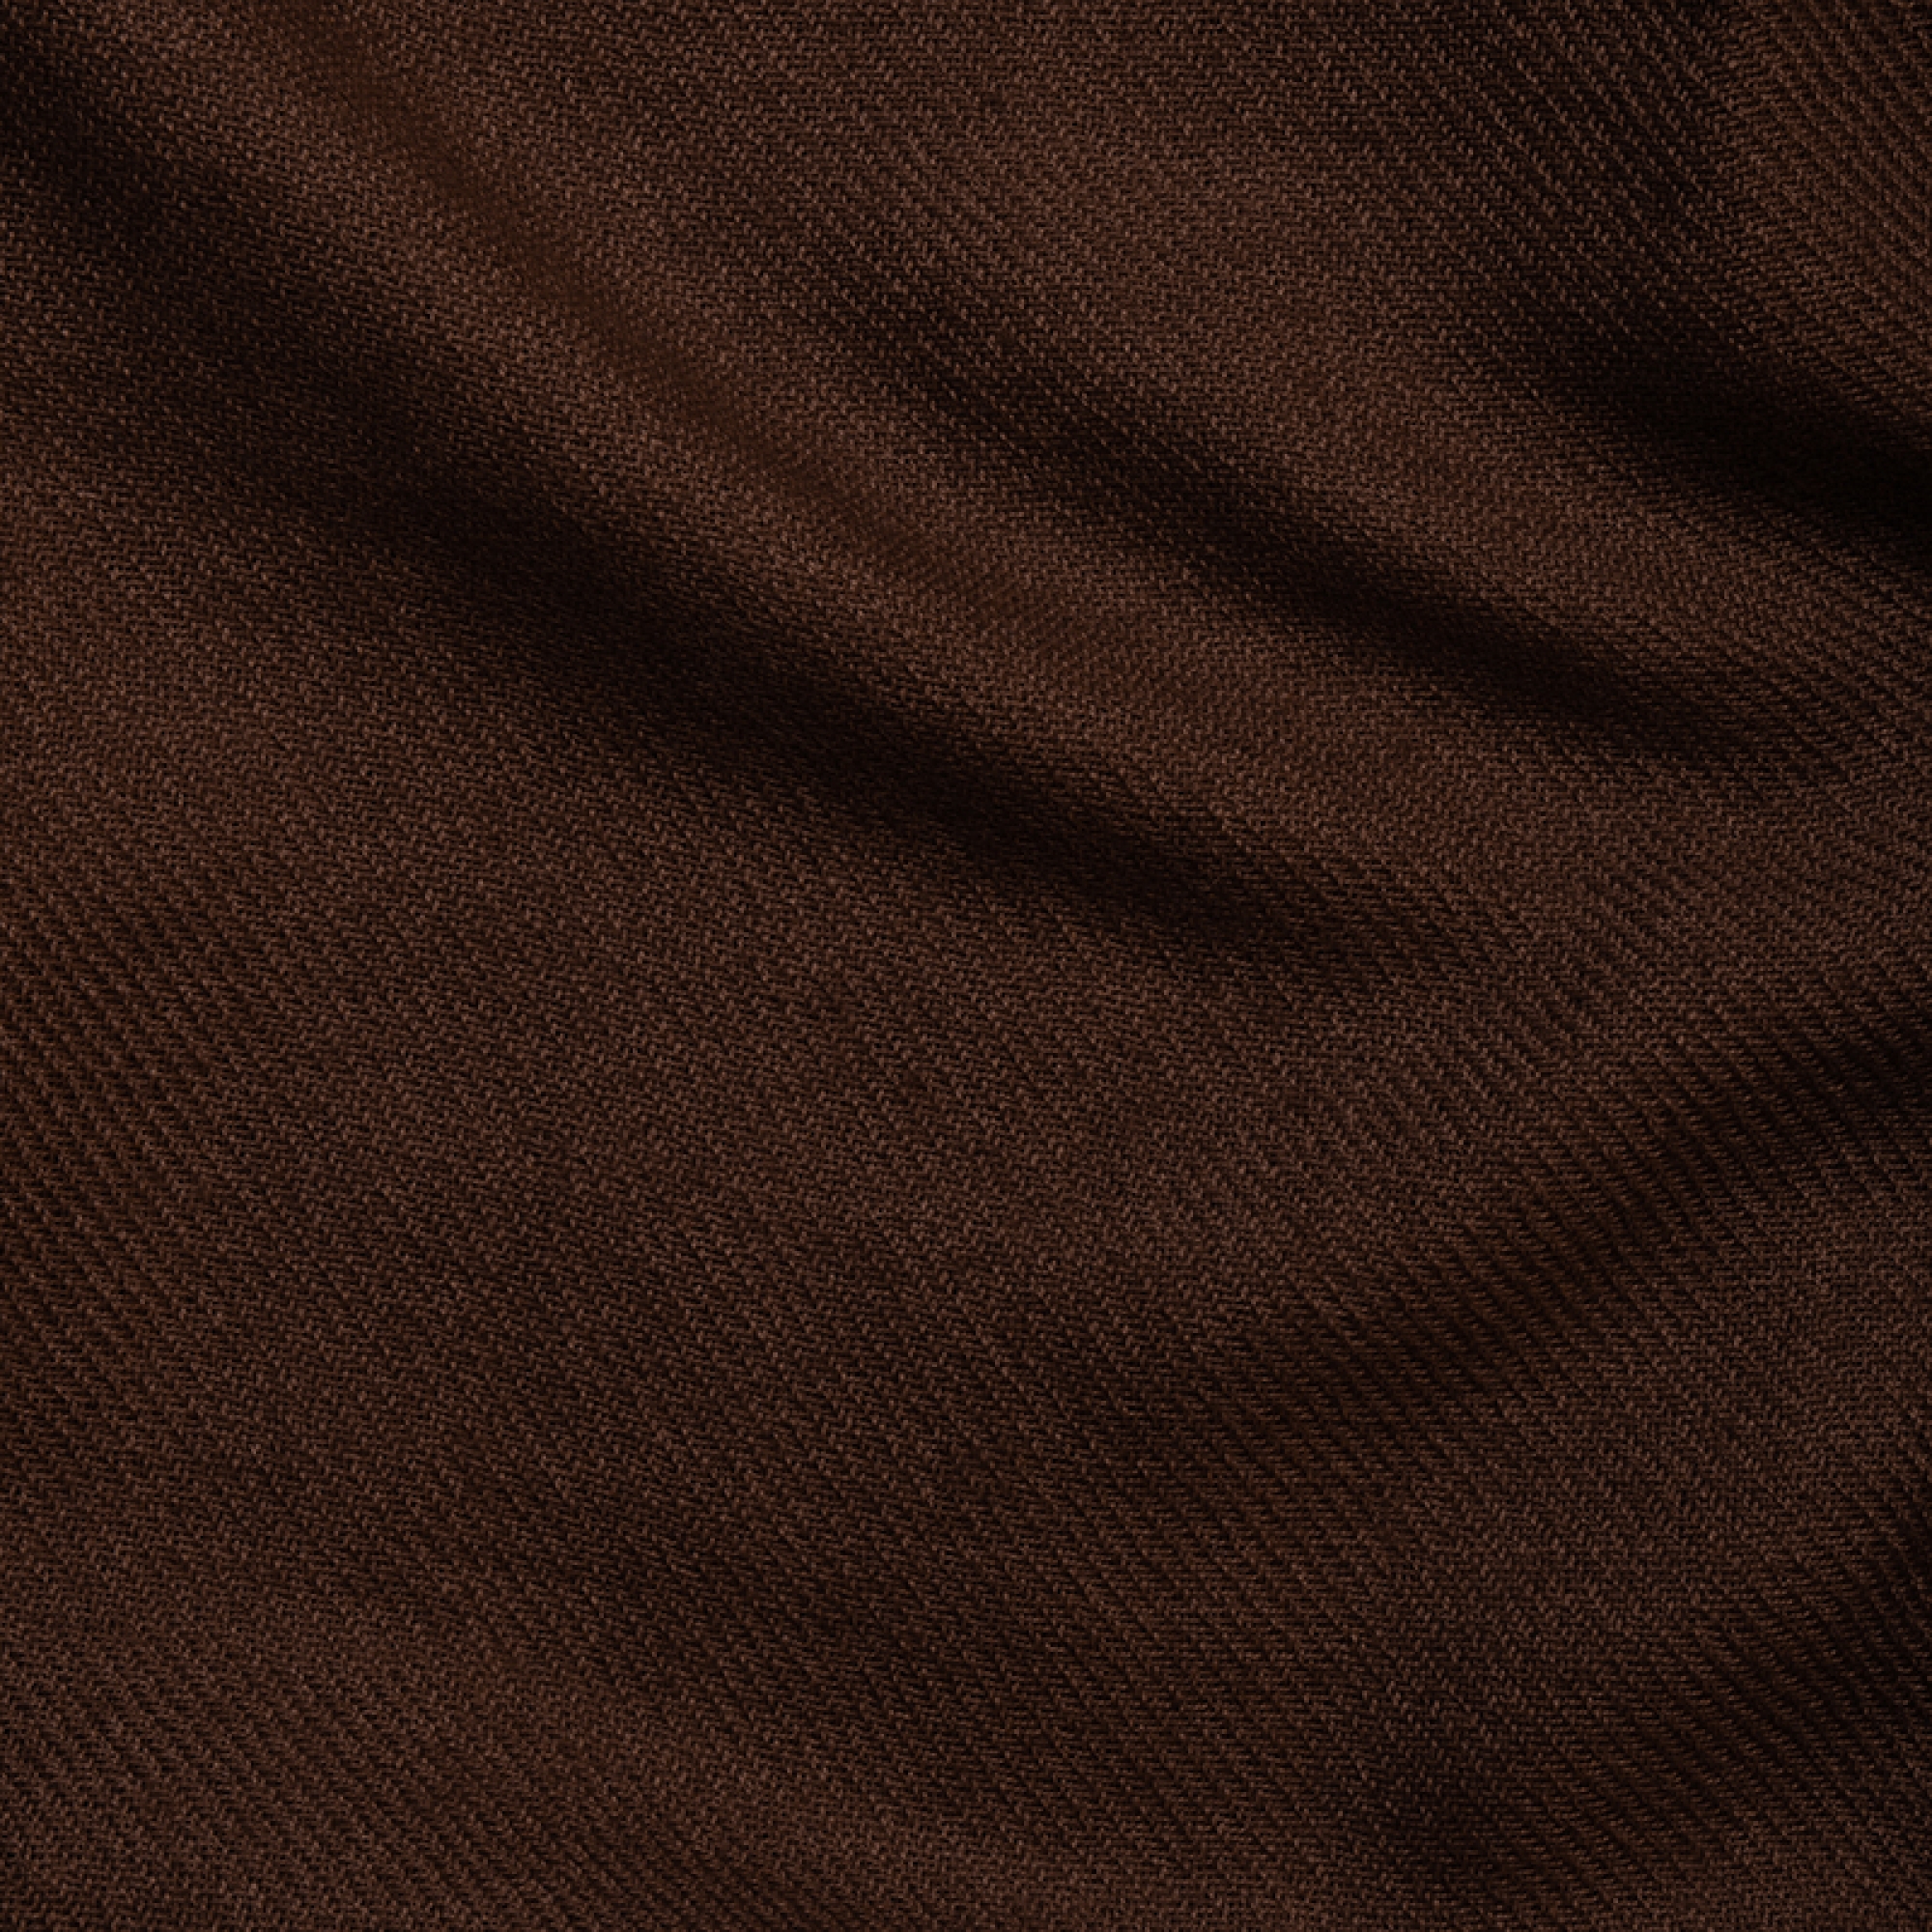 Cachemire pull homme toodoo plain xl 240 x 260 cacao 240 x 260 cm